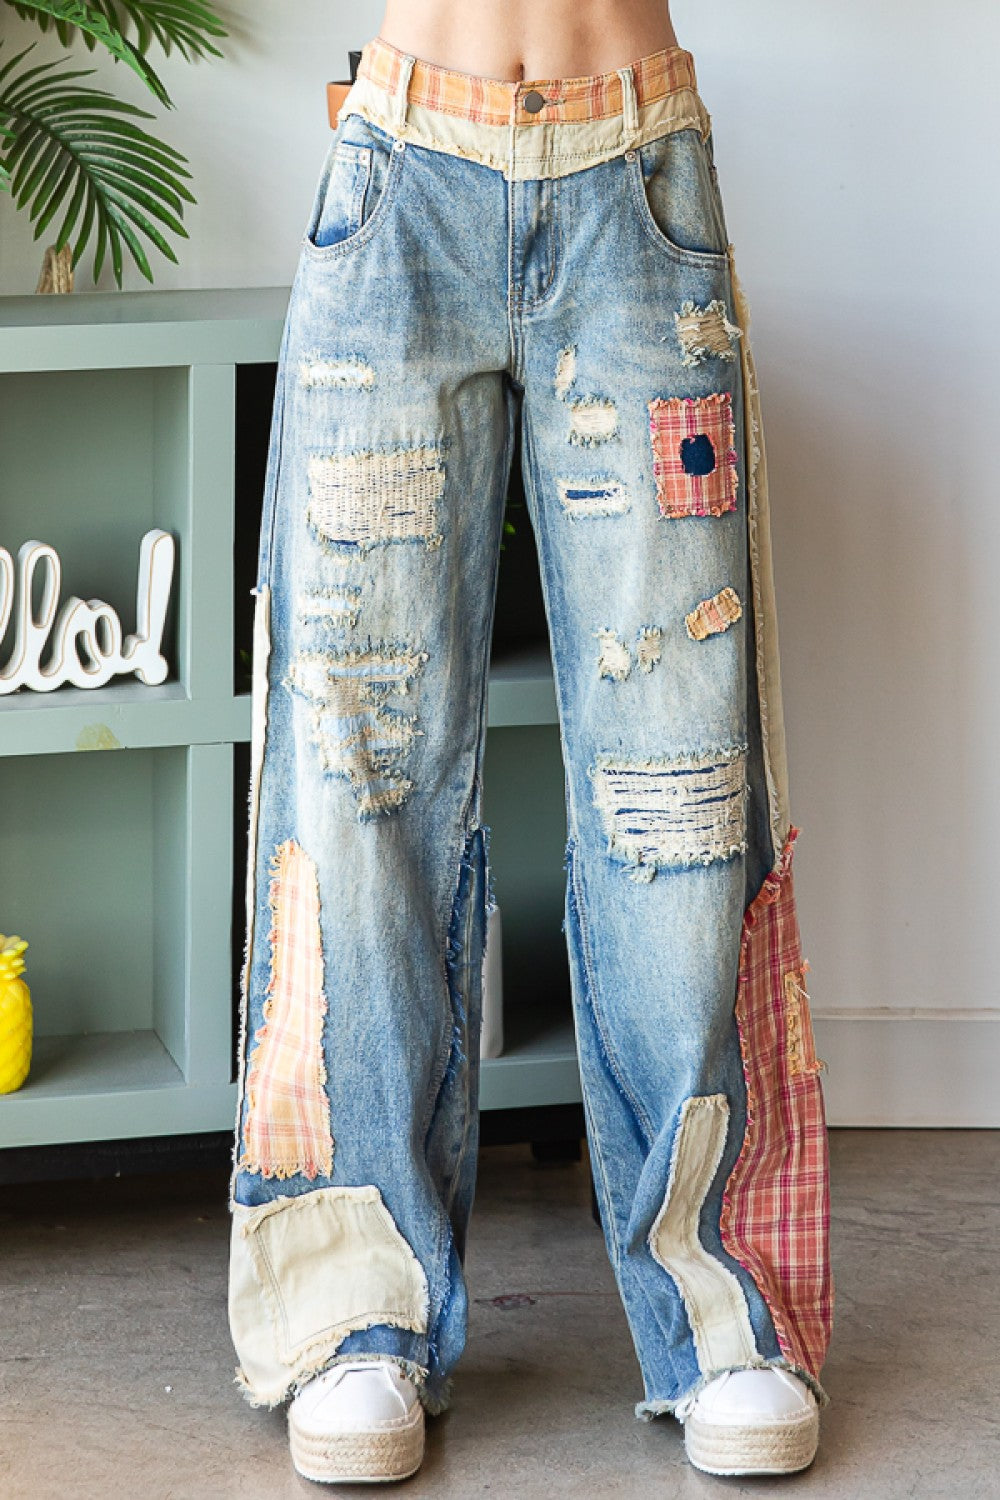 Oli & Hali Plaid Patchwork Wide Leg Jeans Relaxed Fit Mineral Washed Distressed